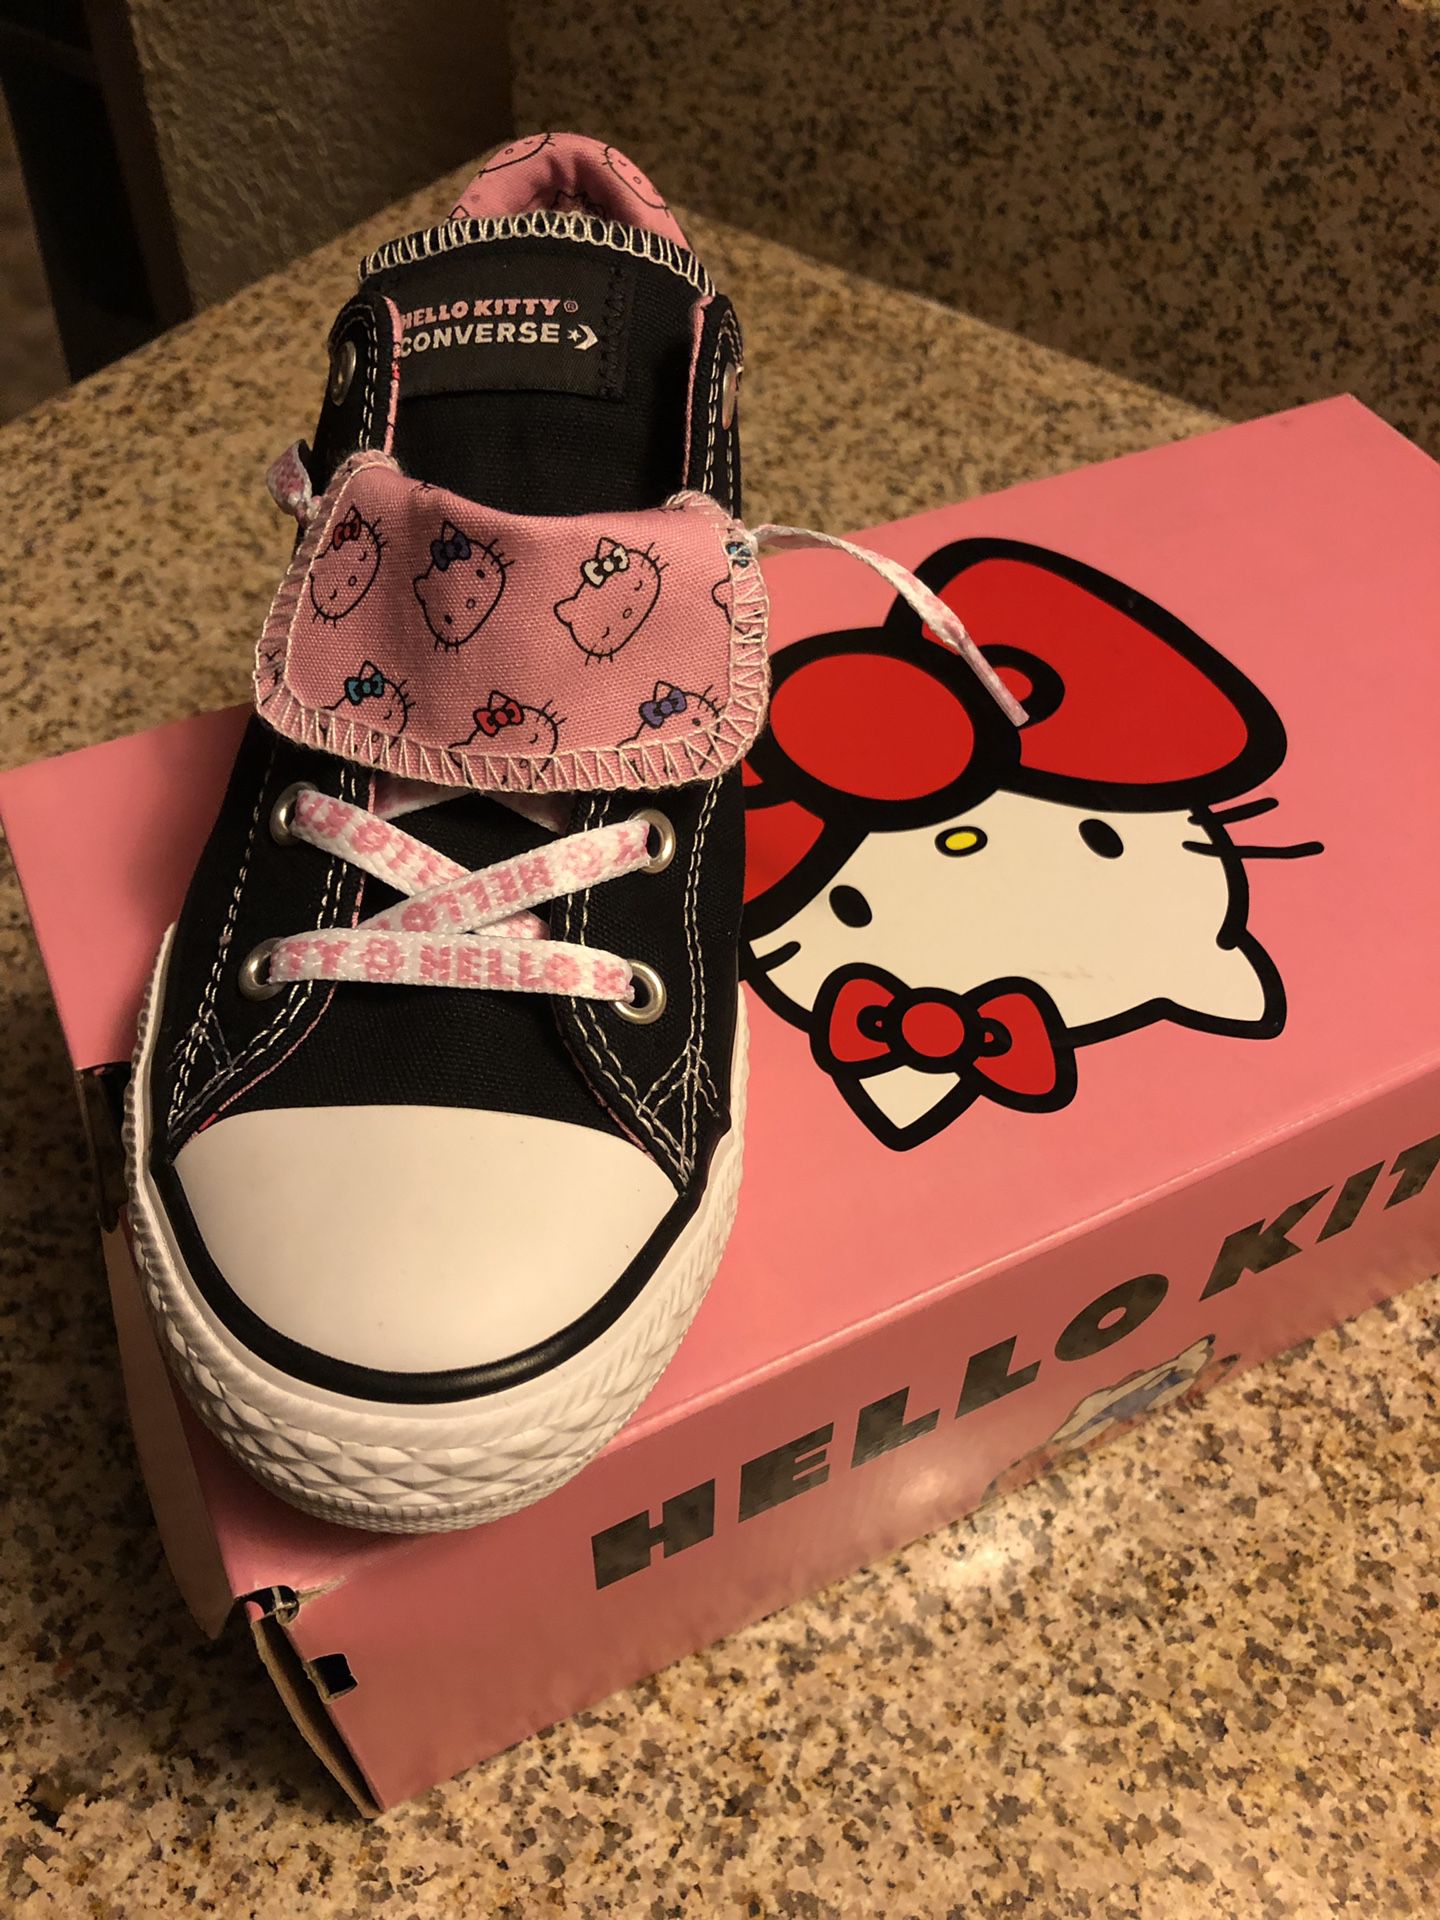 Hello kitty tennis converse size 4 new never used no delivery or ship 25 dls firm on the price I pay 50 dls